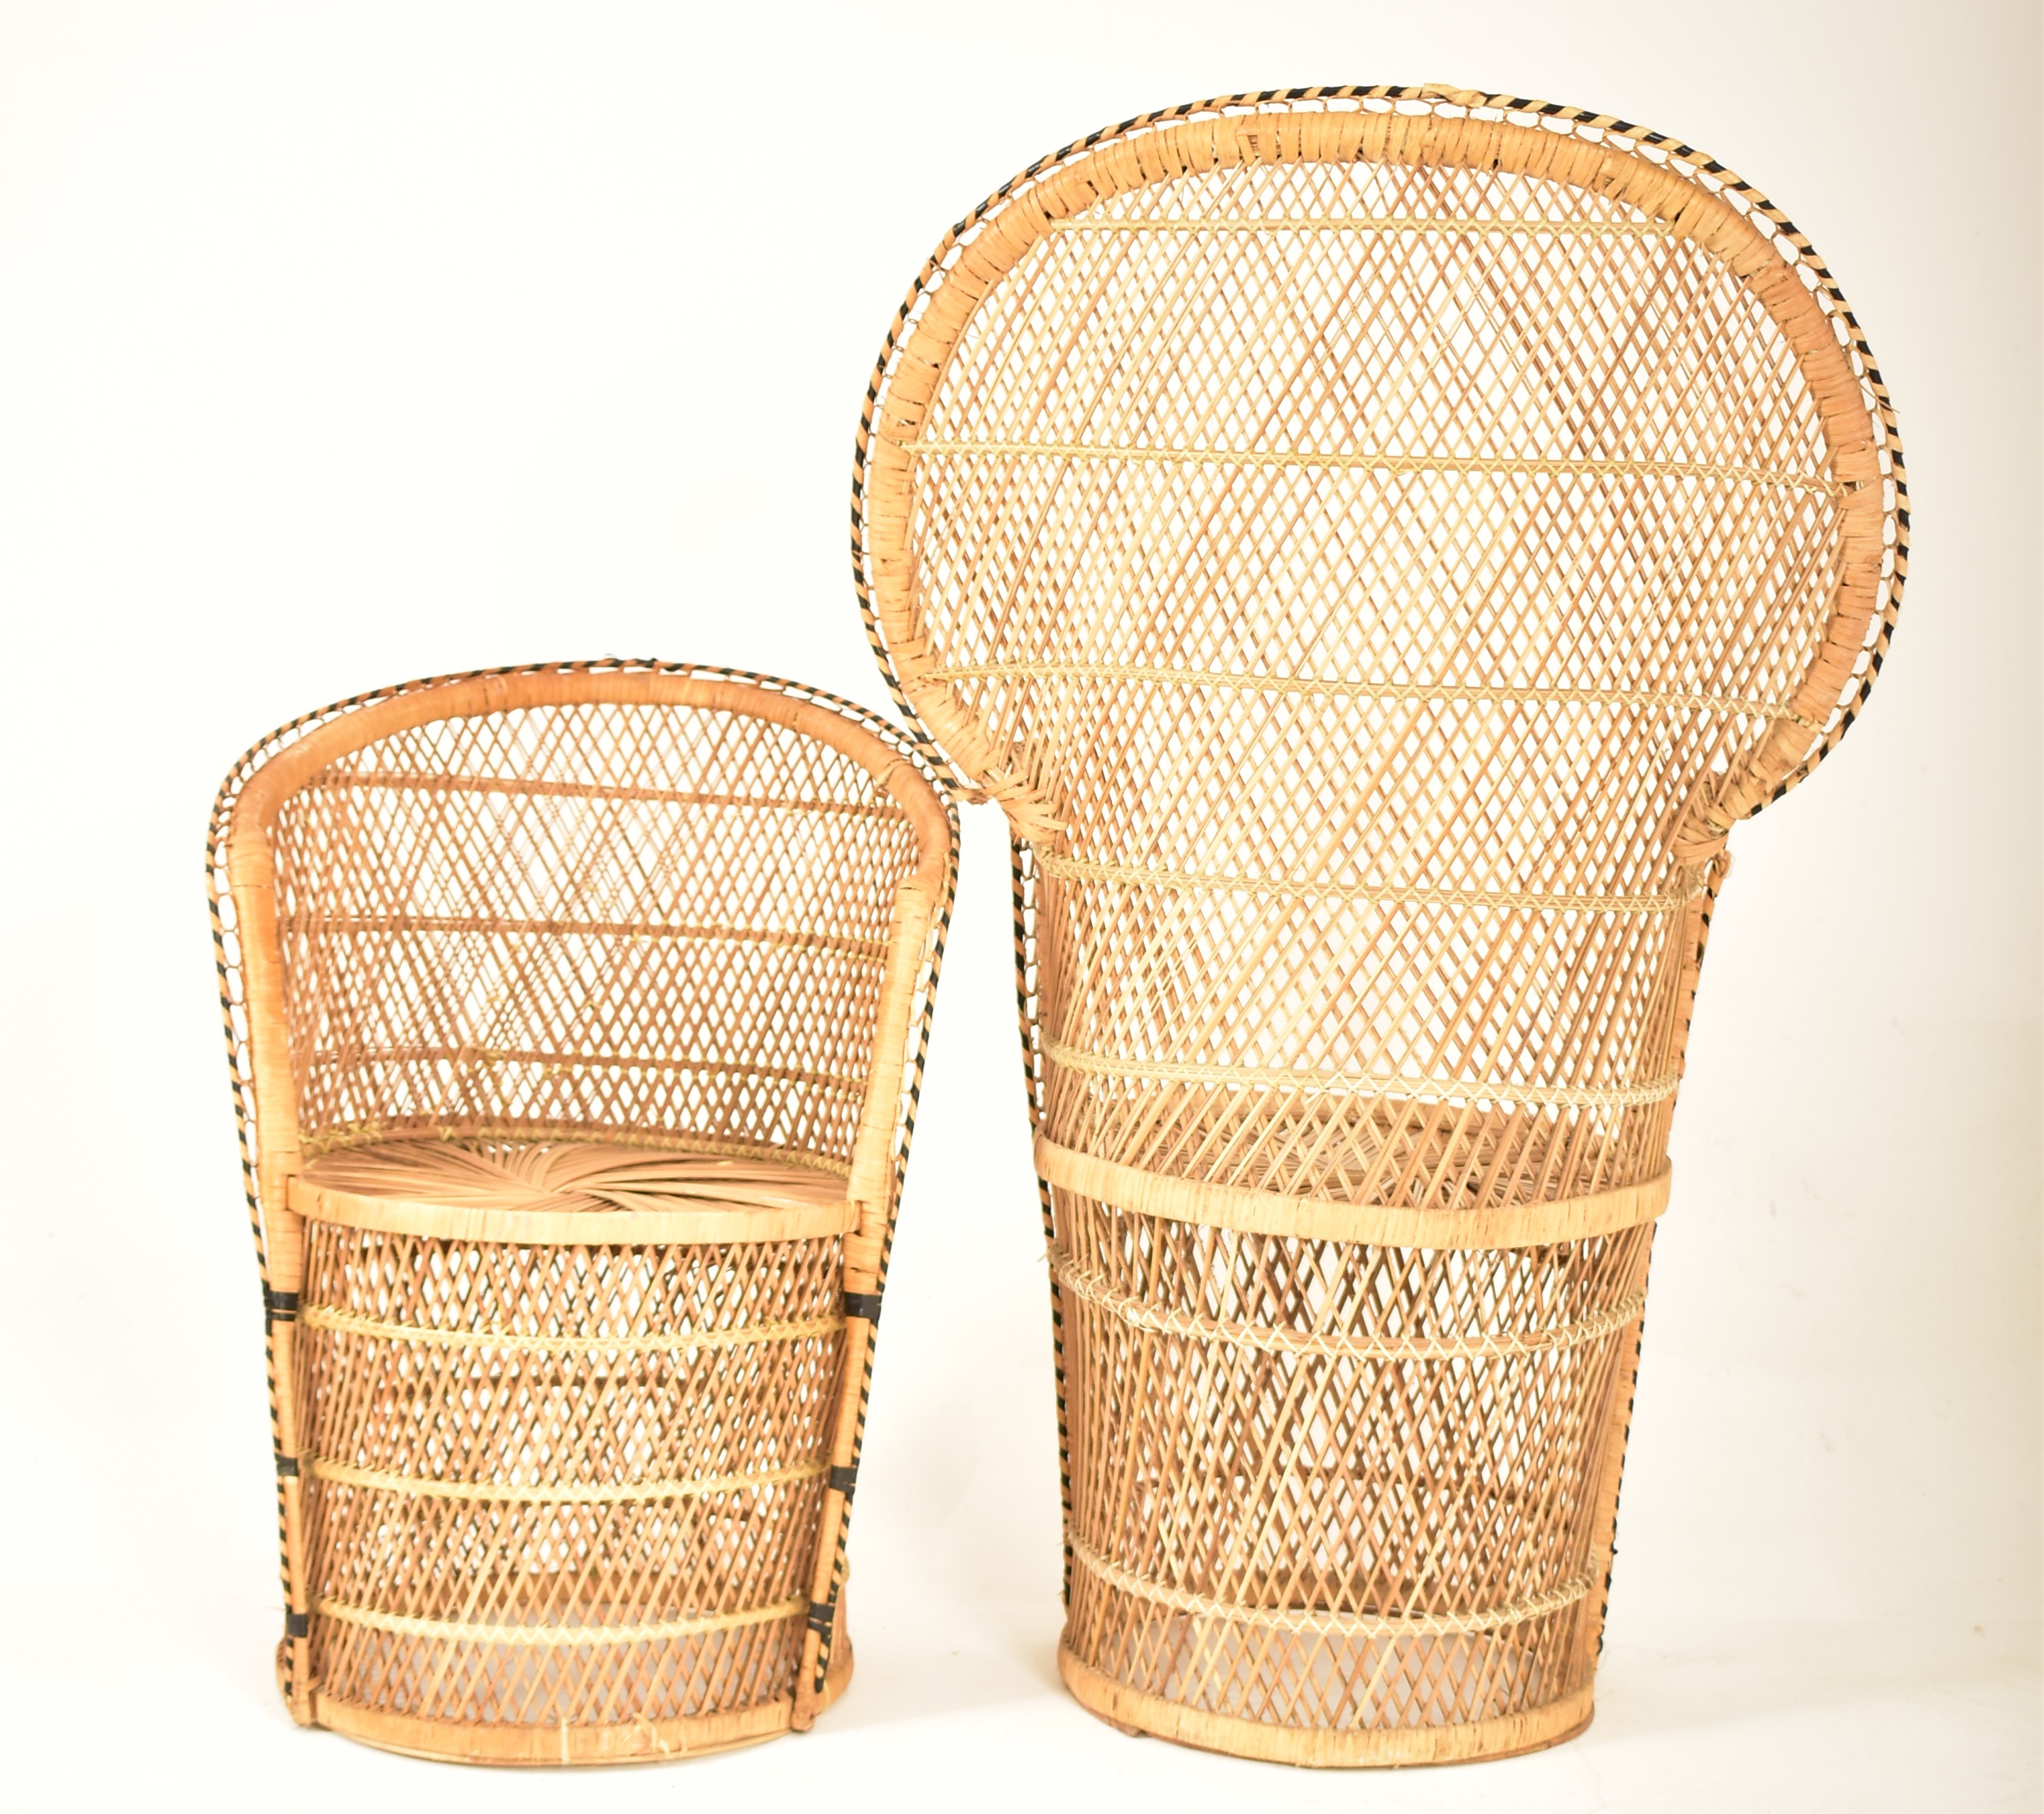 TWO RETRO 20TH CENTURY 1970S WICKER PEACOCK CHAIRS - Image 3 of 5